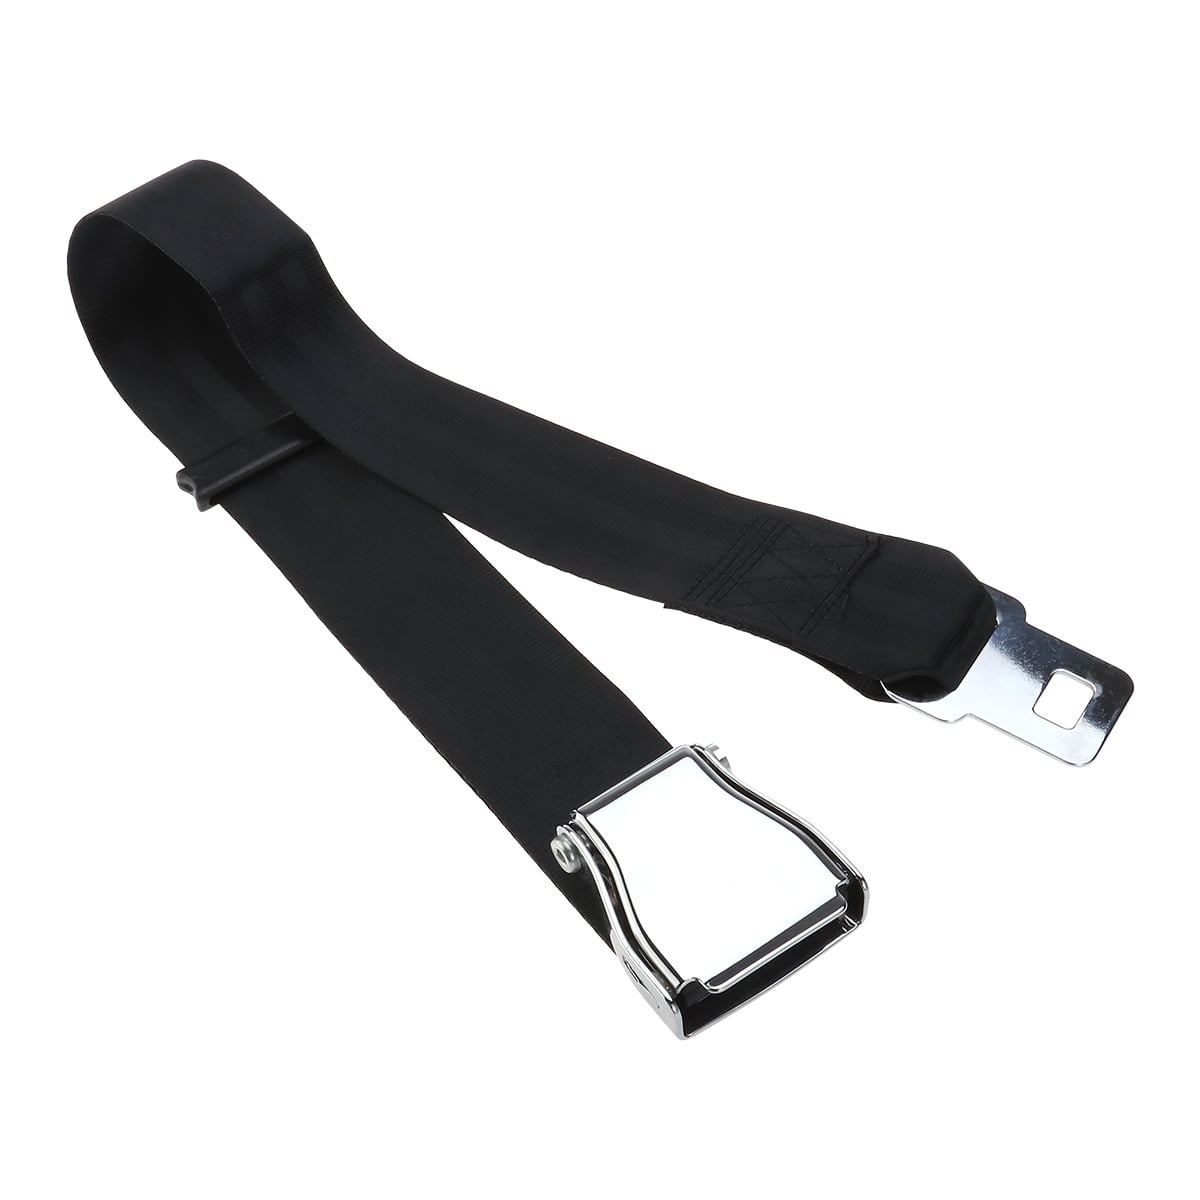 Type A 100cm Airplane Safe Seat Belt Extender Extension Airline Buckle Aircraft 